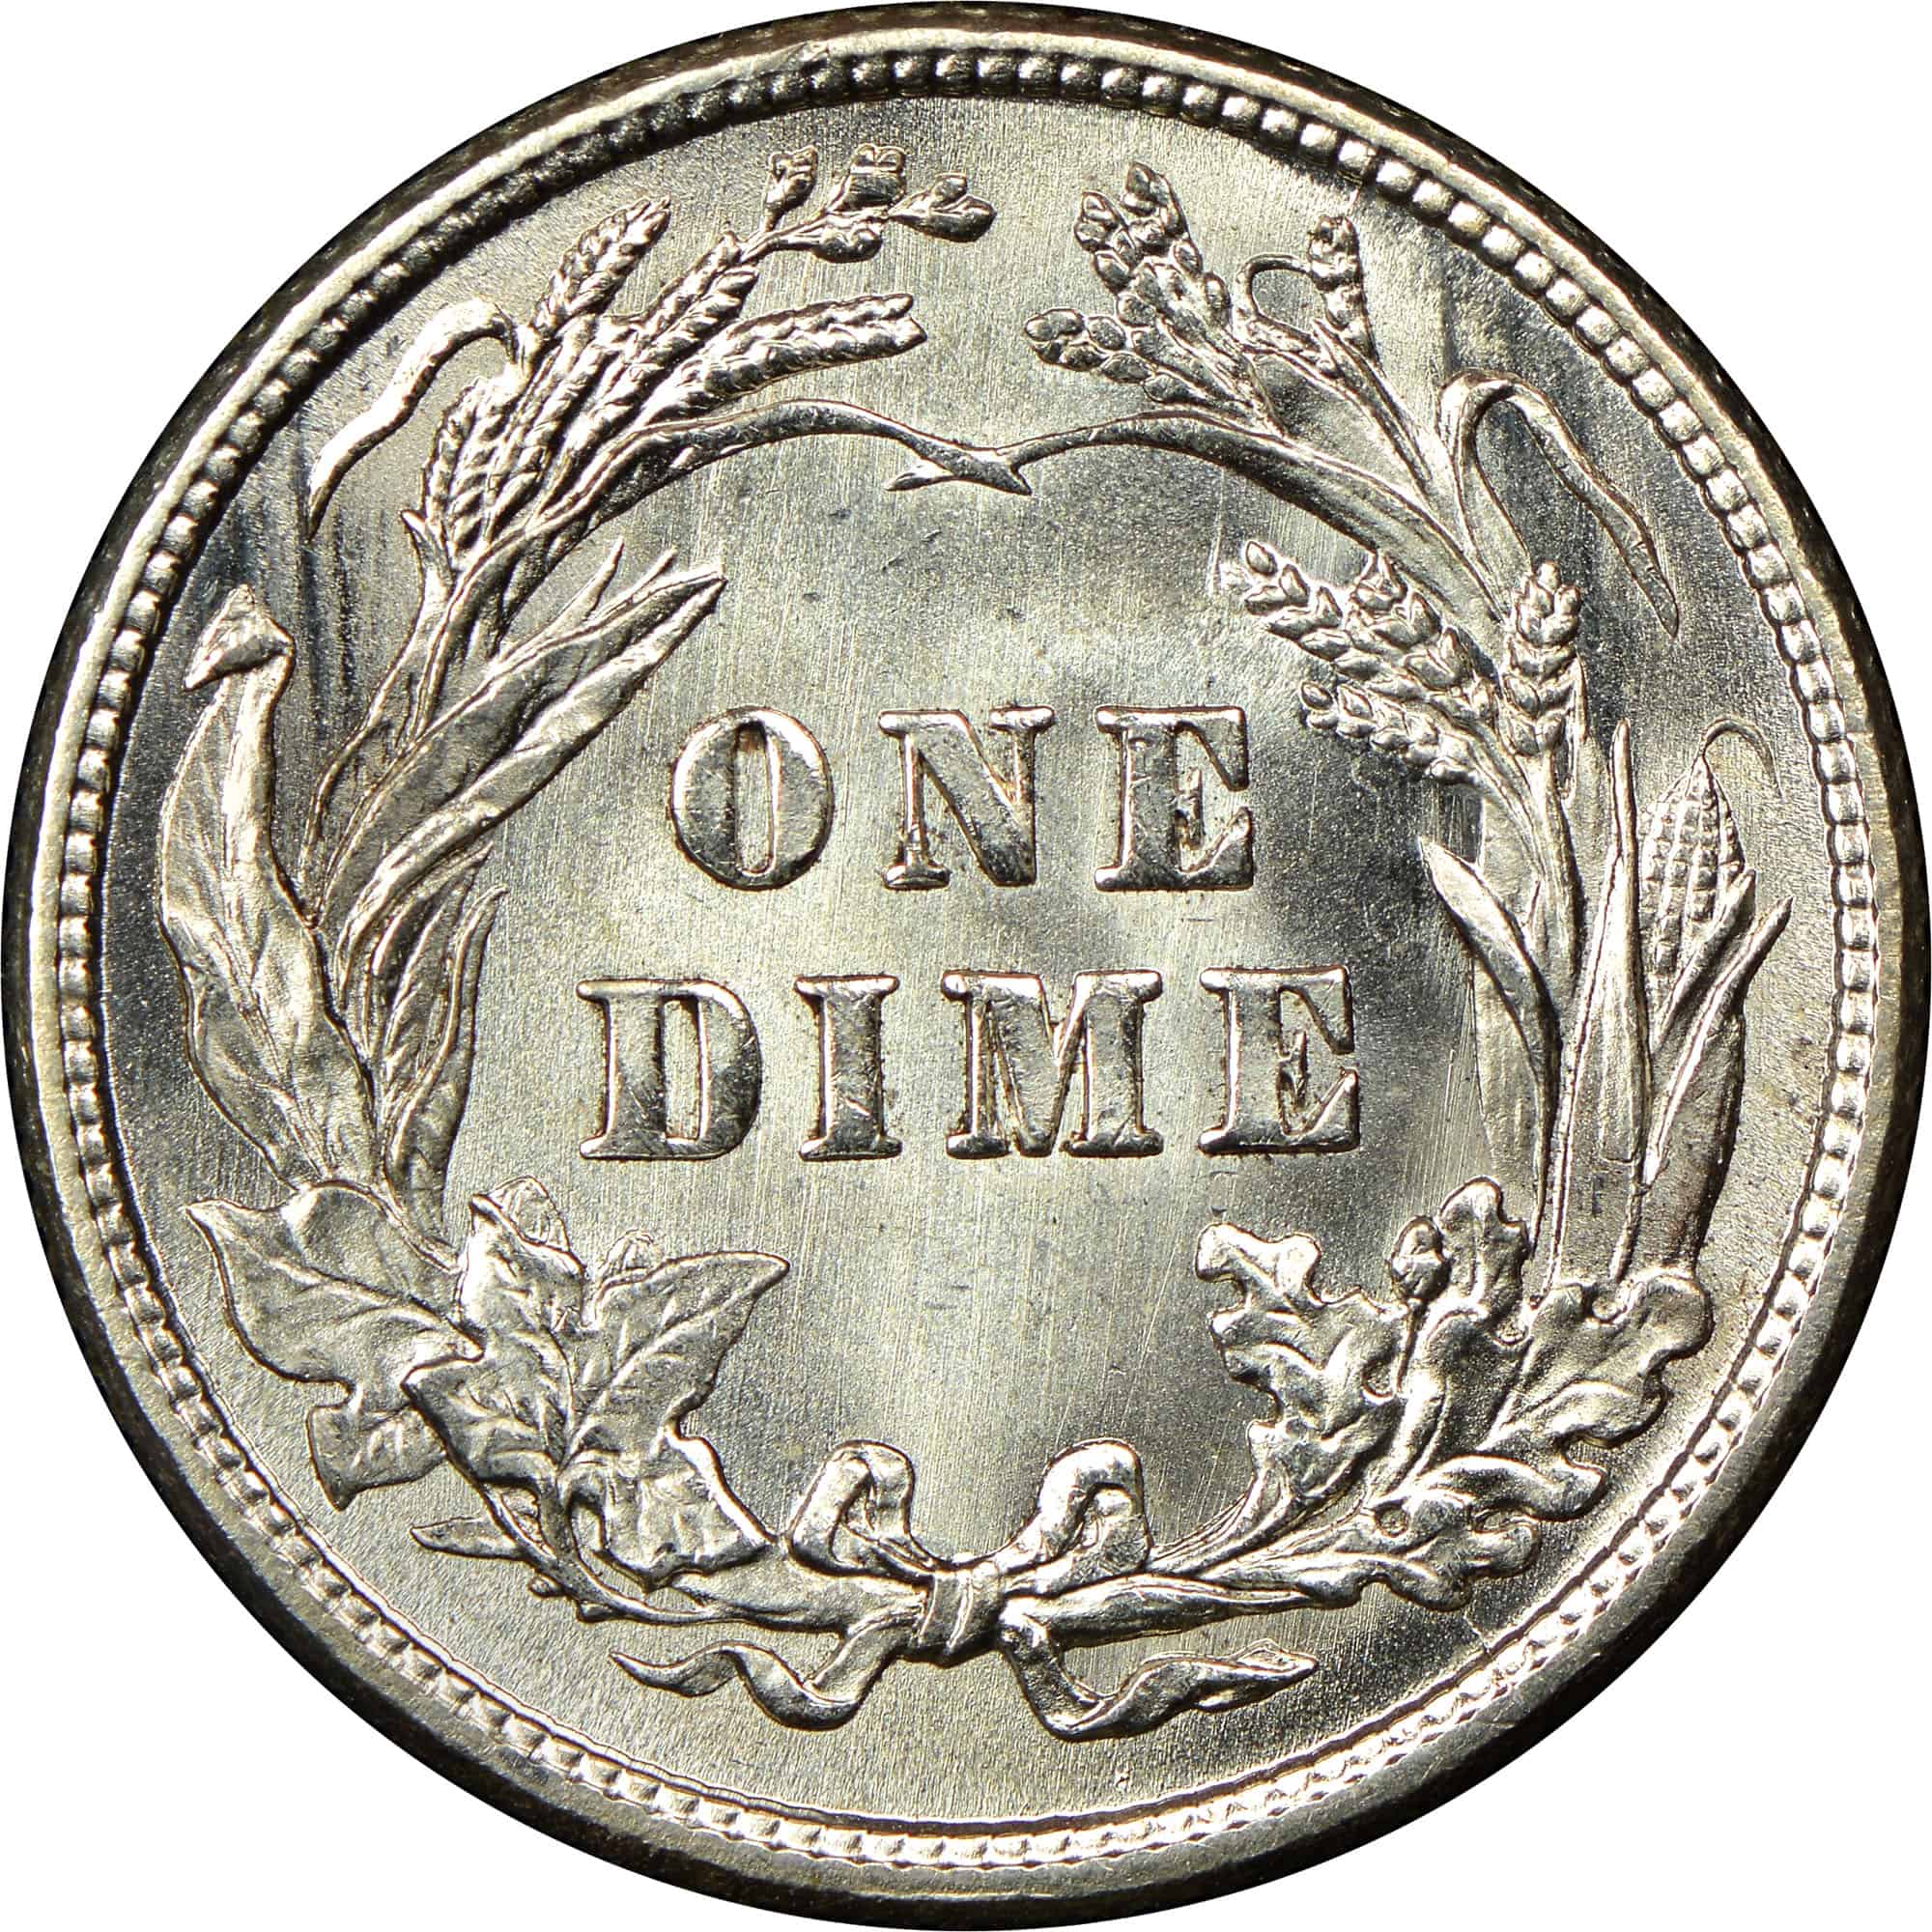 The reverse of the 1913 Barber dime